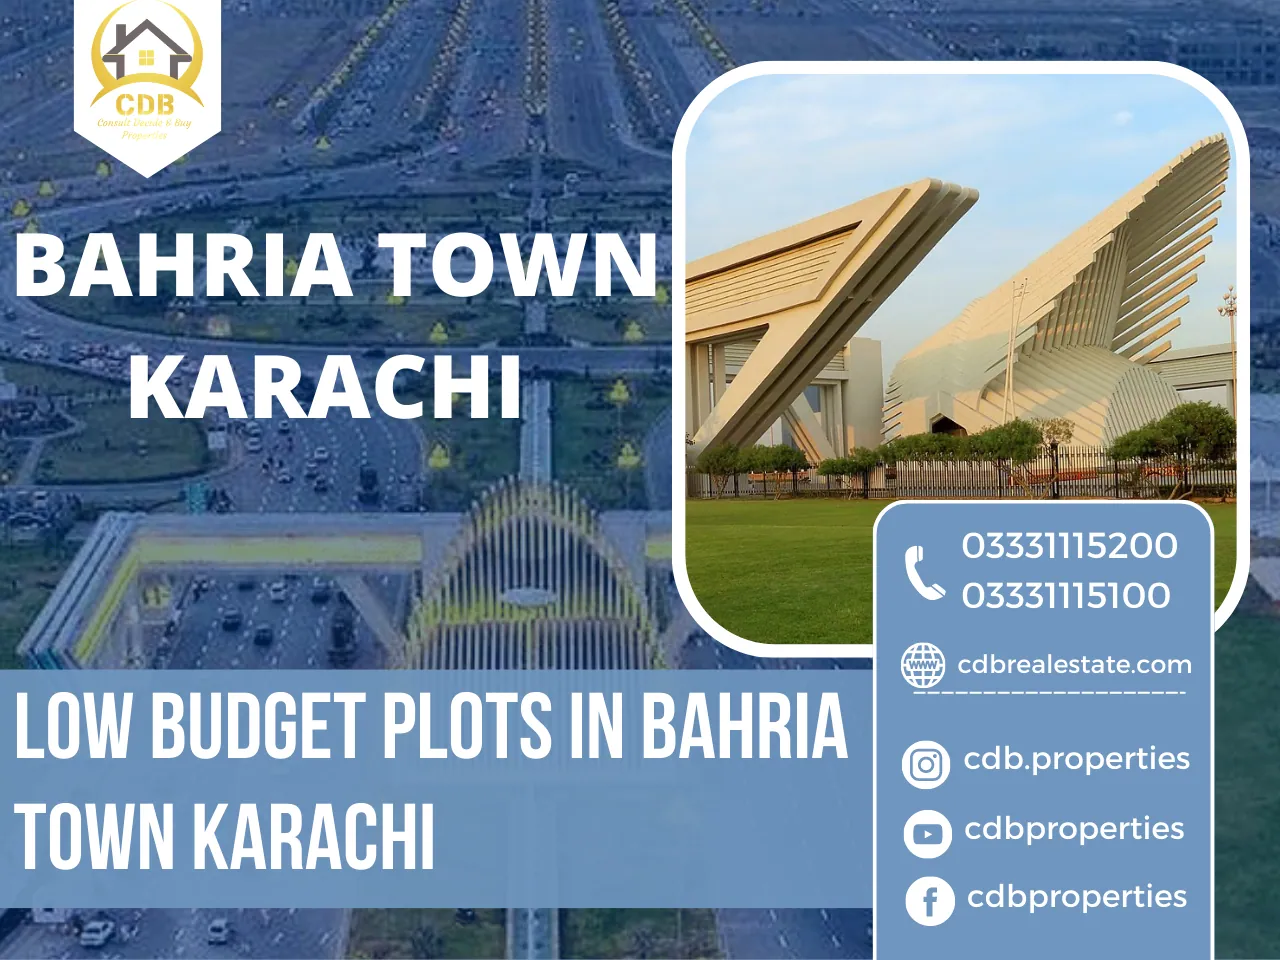 Low Budget Plots In Bahria Town Karachi An Ideal Investment Opportunity